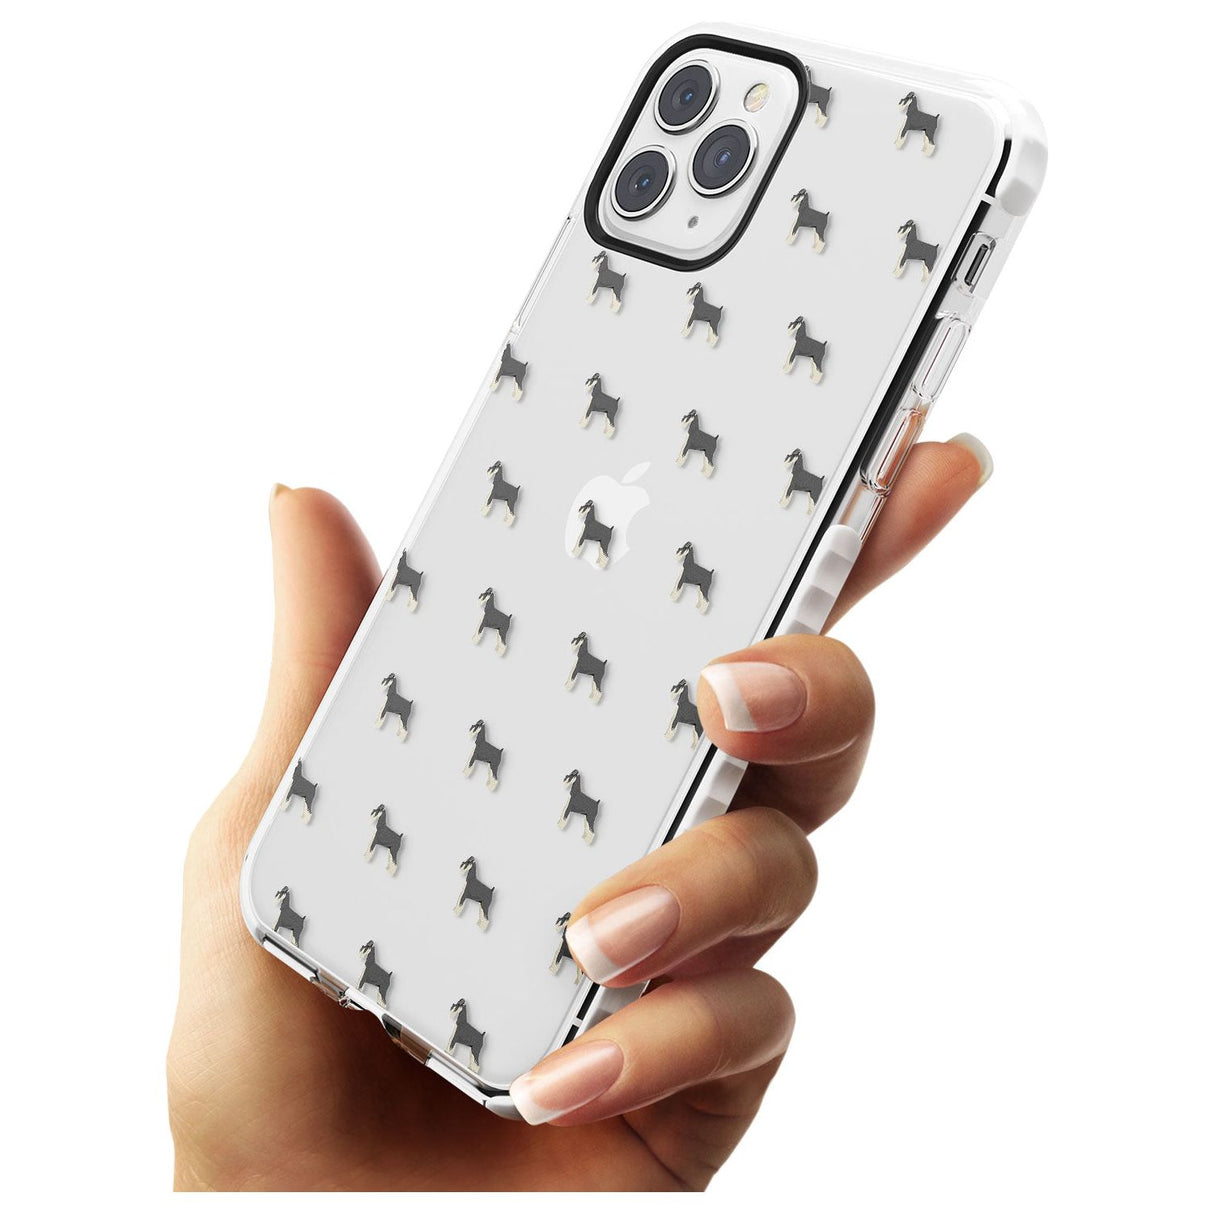 Schnauzer Dog Pattern Clear Impact Phone Case for iPhone 11 Pro Max